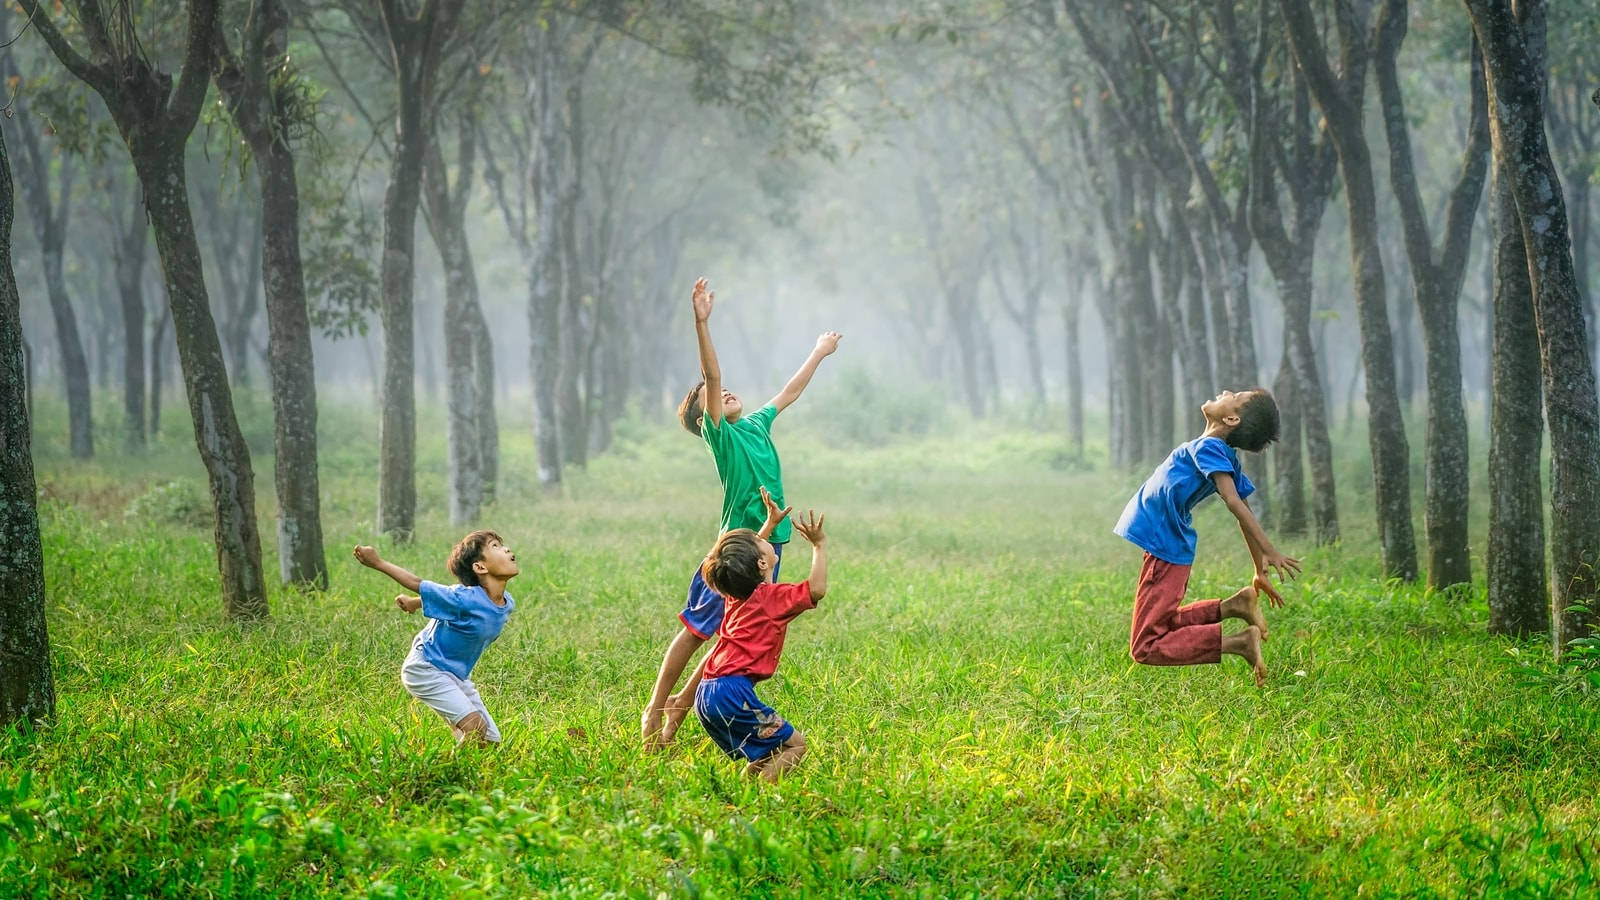 Children Jumping In The Forest Wallpaper